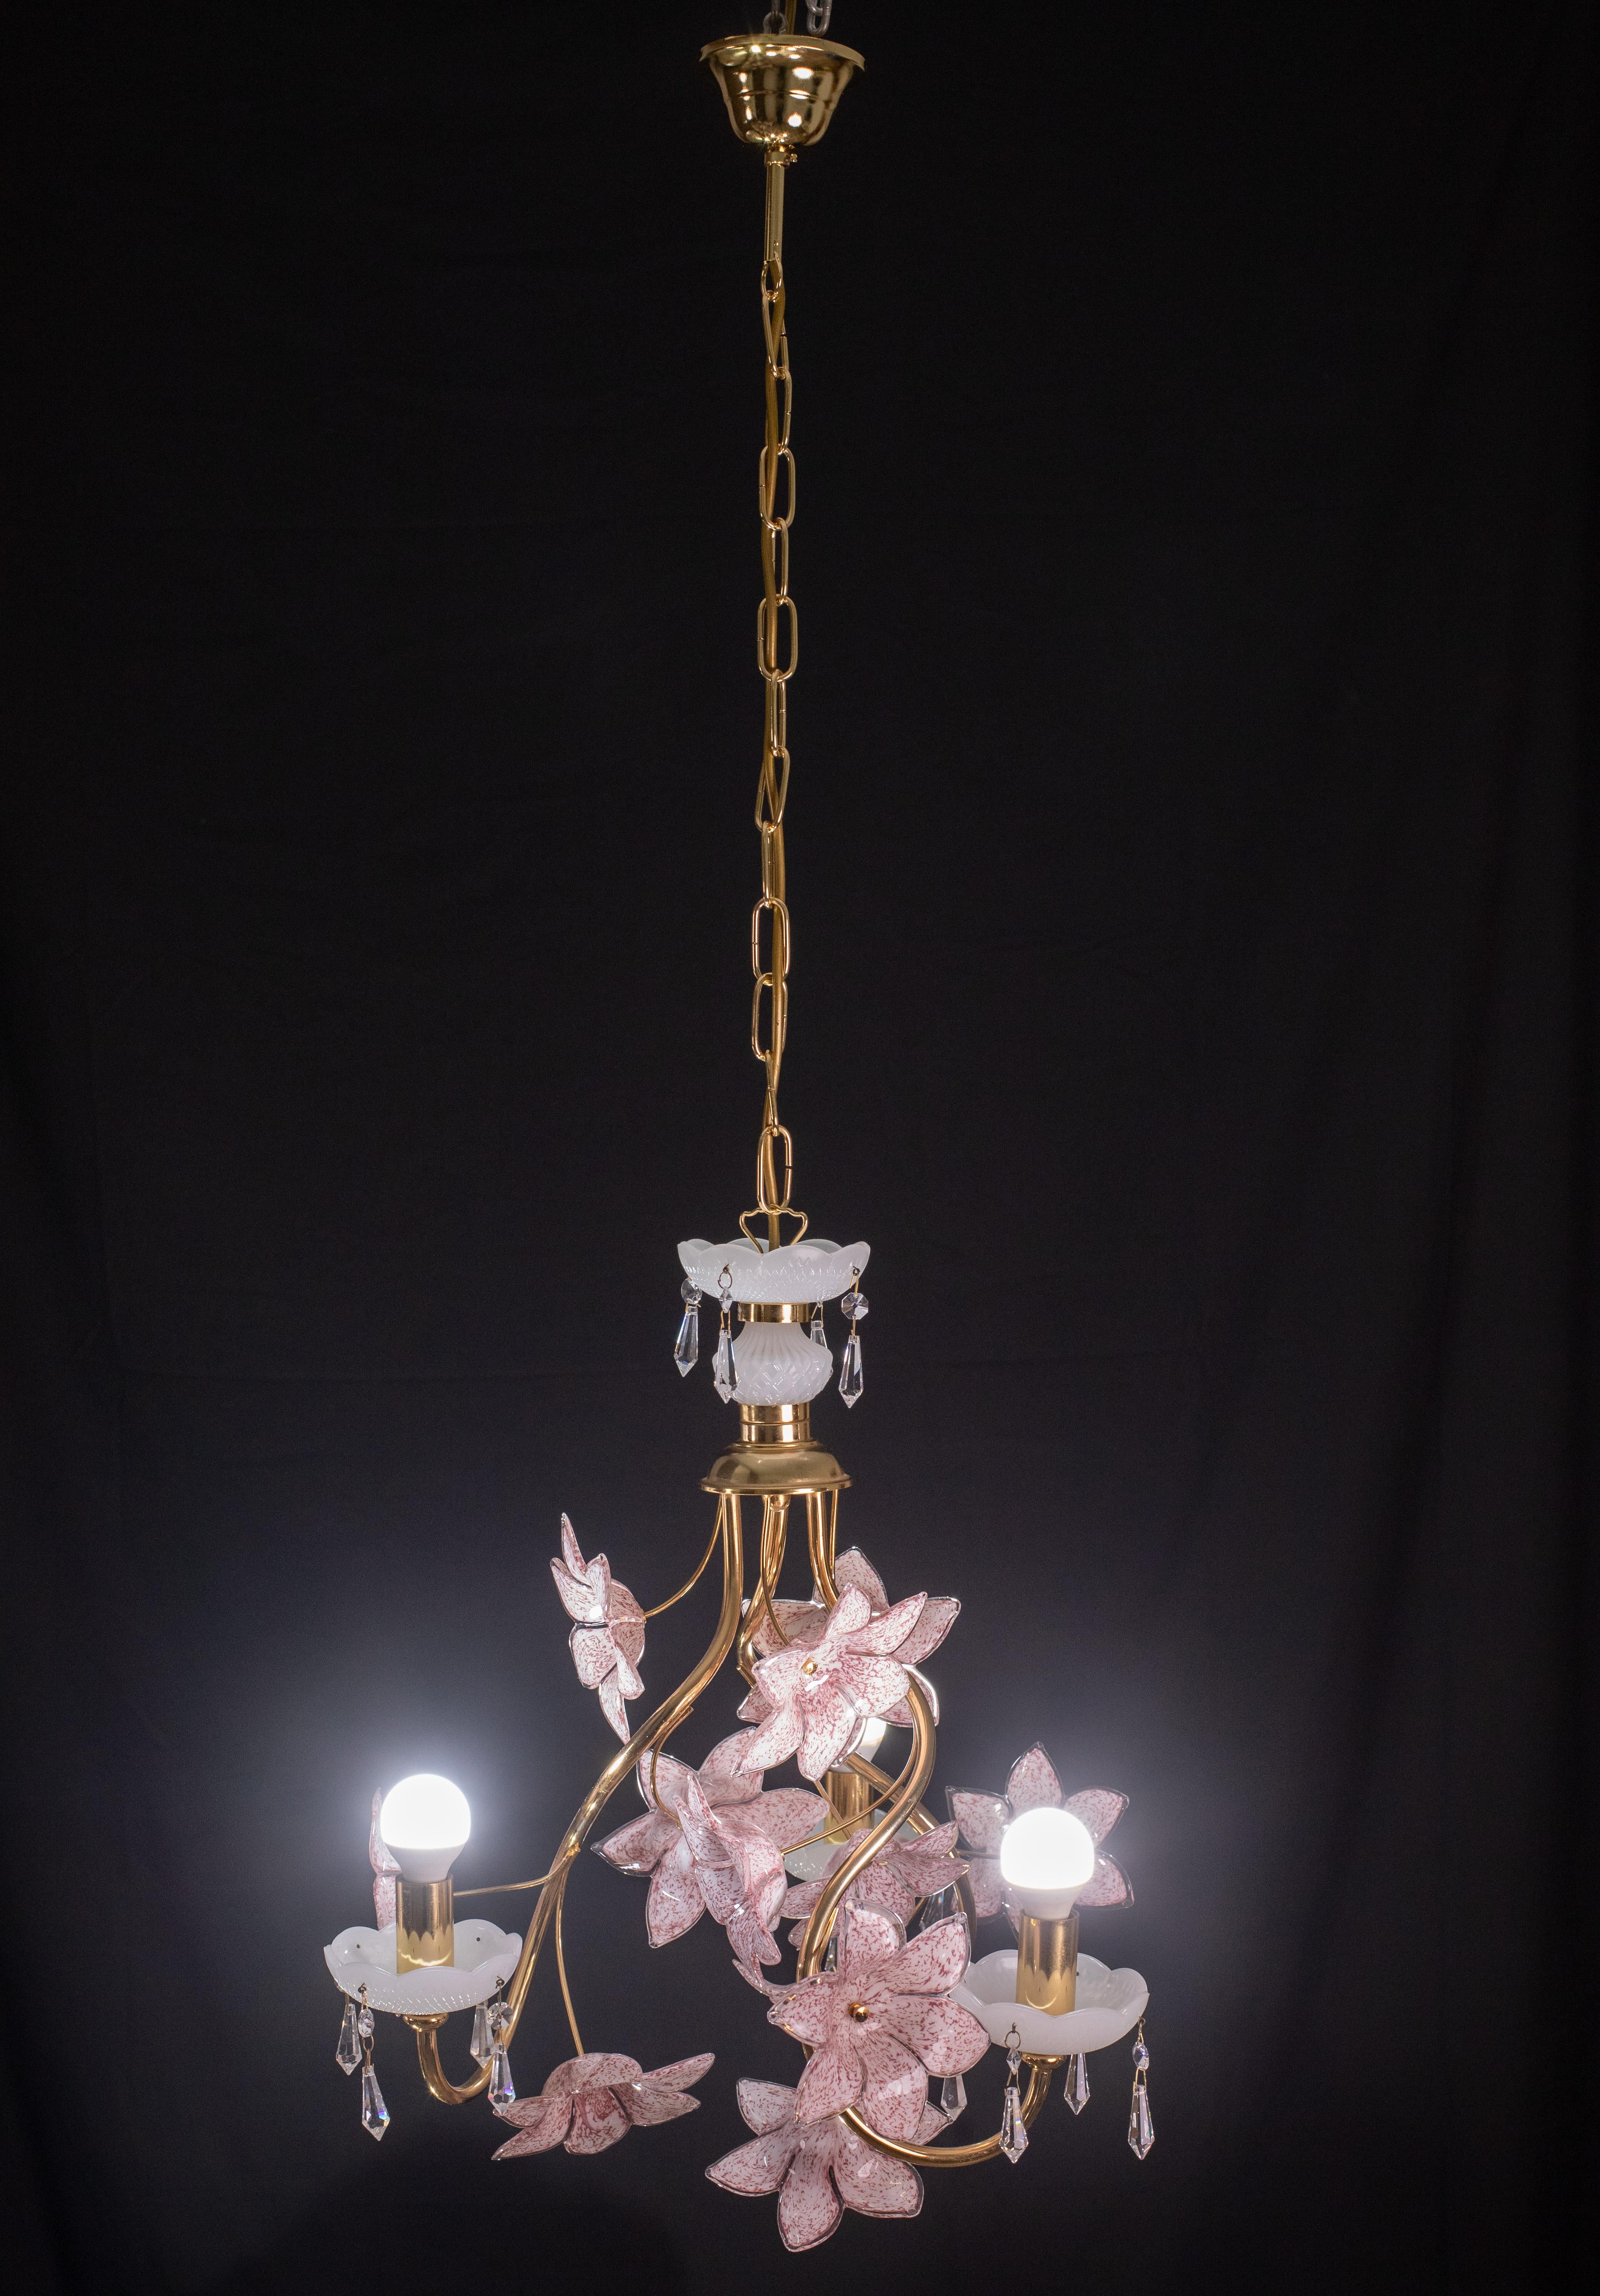 Vintage Murano glass chandelier with pink flowers.
The chandelier has 3 light point with E14 socket.
The frame is made of gold bath and is in good vintage condition.
The height of the chandelier is 115 cm, the diameter is 55 cm, the height without